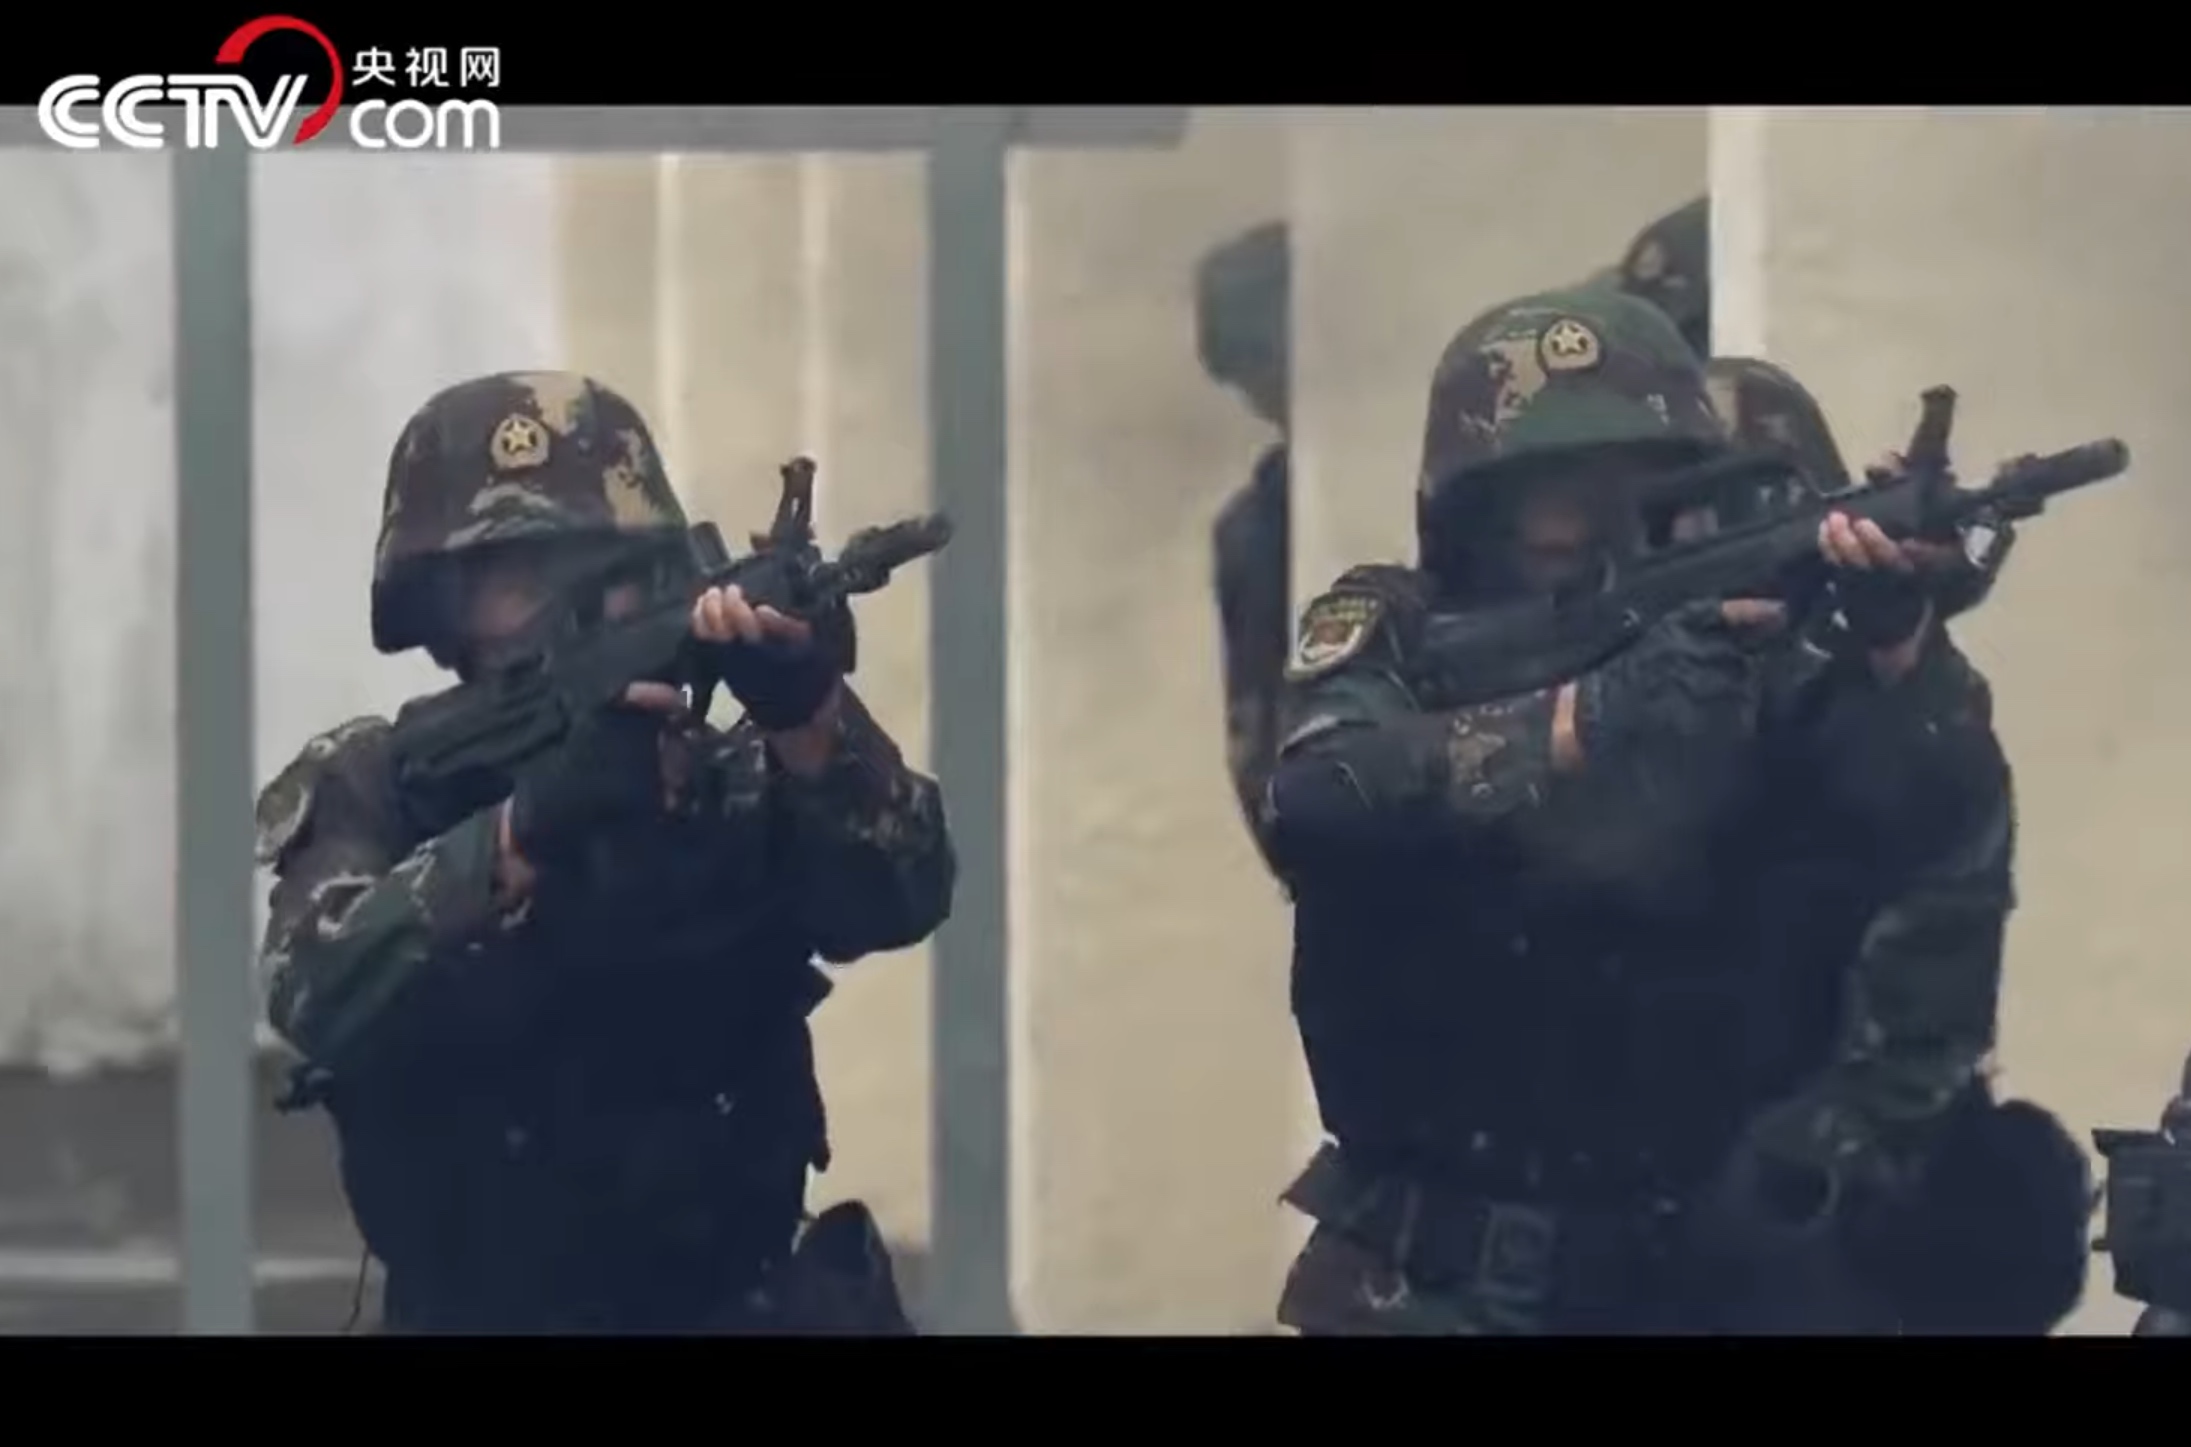 A still from a recent PLA video showcasing the Hong Kong garrison’s capabilities, including riot control. Screengrab via YouTube.